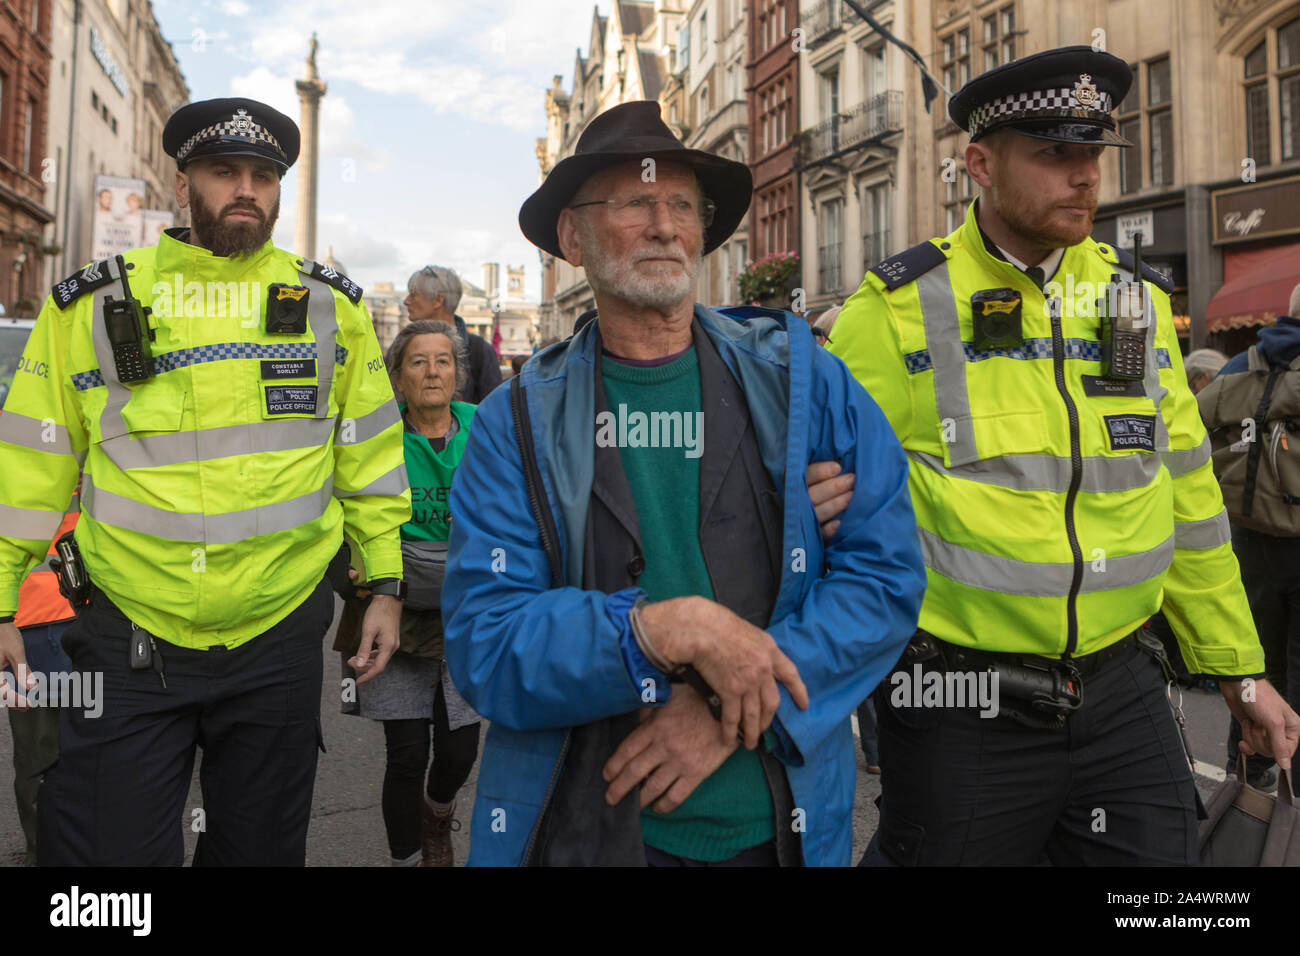 Whitehall, Westminster, UK. 16th Oct, 2019. Extinction Rebellion protesters block Whitehall, near Trafalgar Square. The protest follows the Metropolitan Police new restrictions using Section 14 of the Public Order Act, which requires protesters linked to extinction rebellion to disperse by 21:00 BST or risk arrest. Penelope Barritt/Alamy Live News Stock Photo